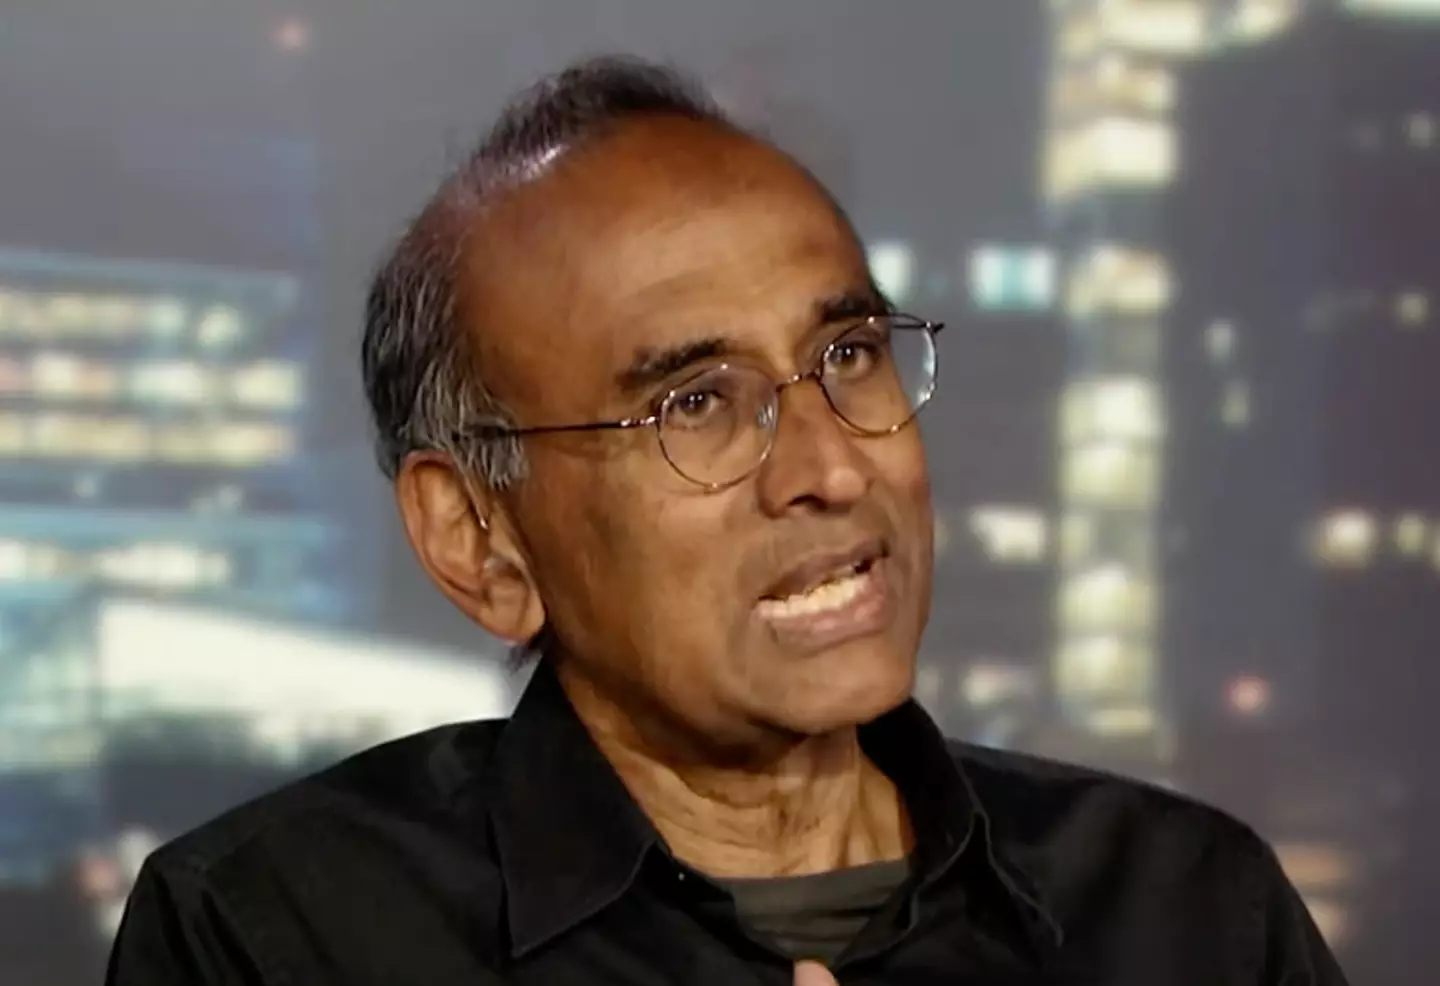 Venki Ramakrishnan has explained why humans living for significantly longer would drastically change society. (ABC News)